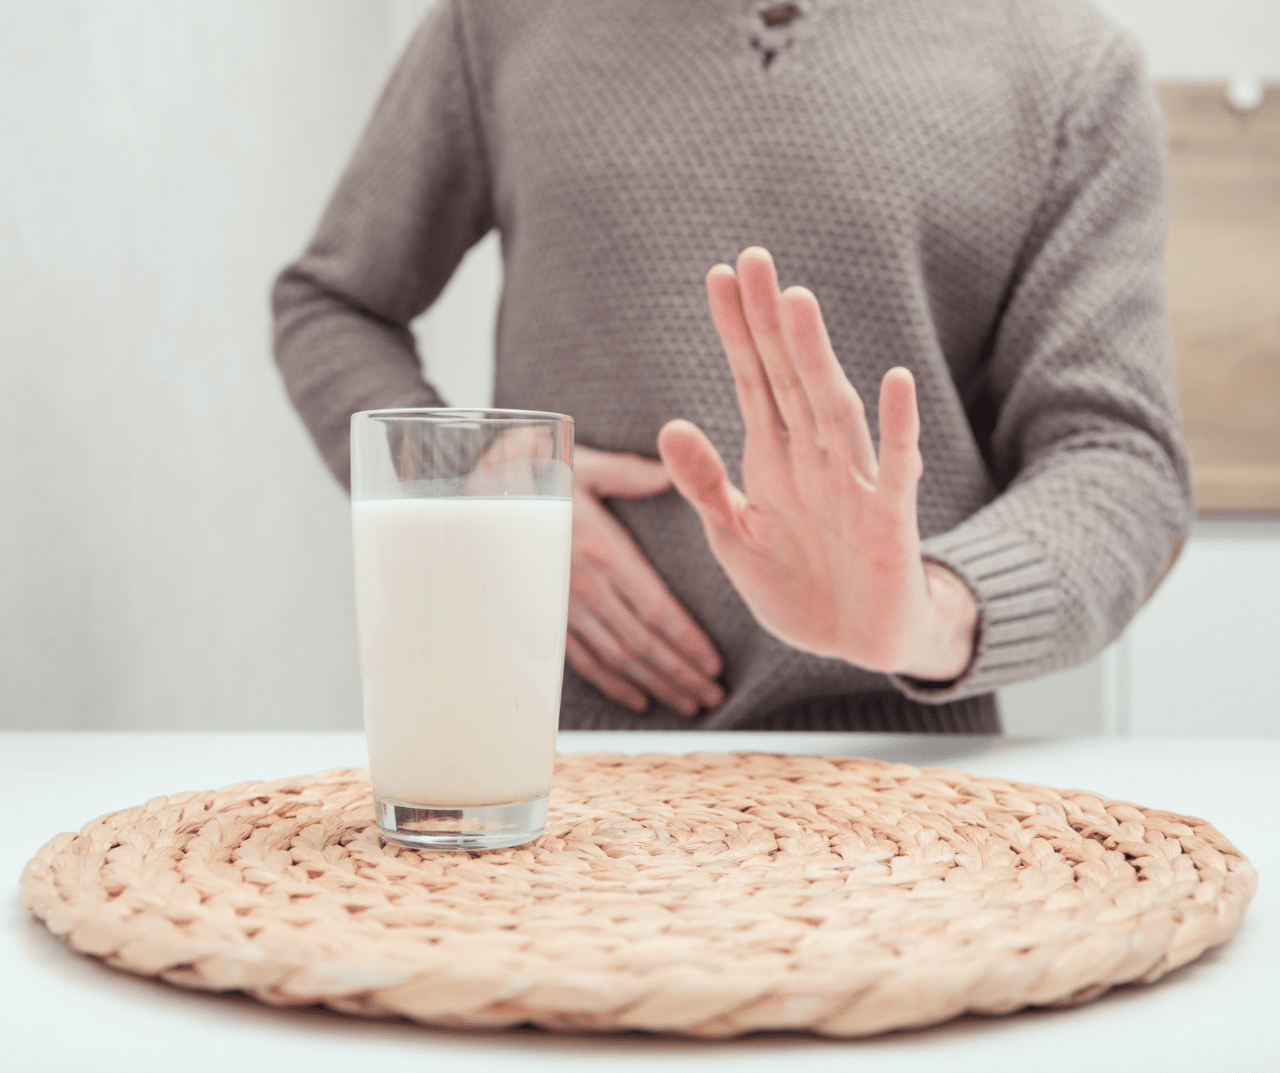 Why Milk Is Bad For You 9 Reasons You Should Avoid Dairy Switch4Good